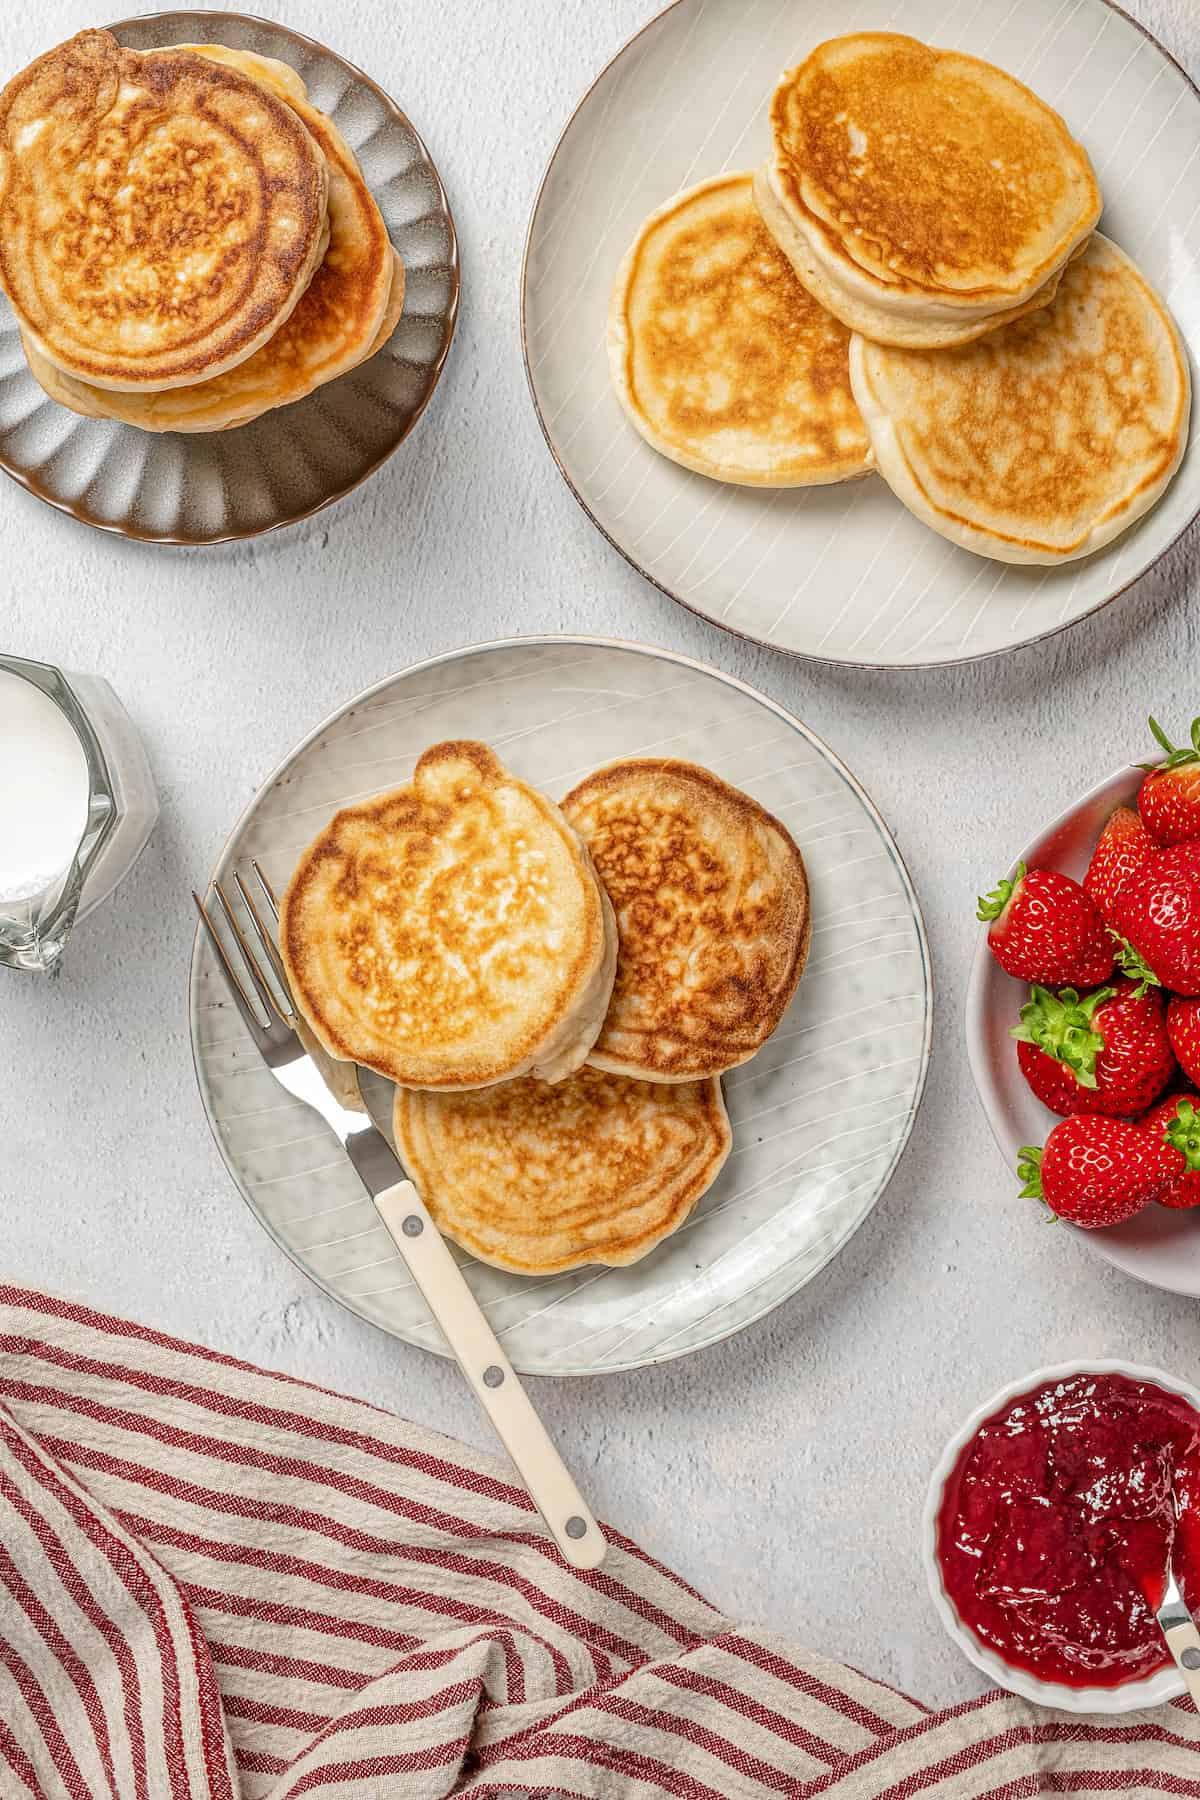 Overhead view of plates of gluten-free pikelets next to a bowl of strawberries and various toppings.